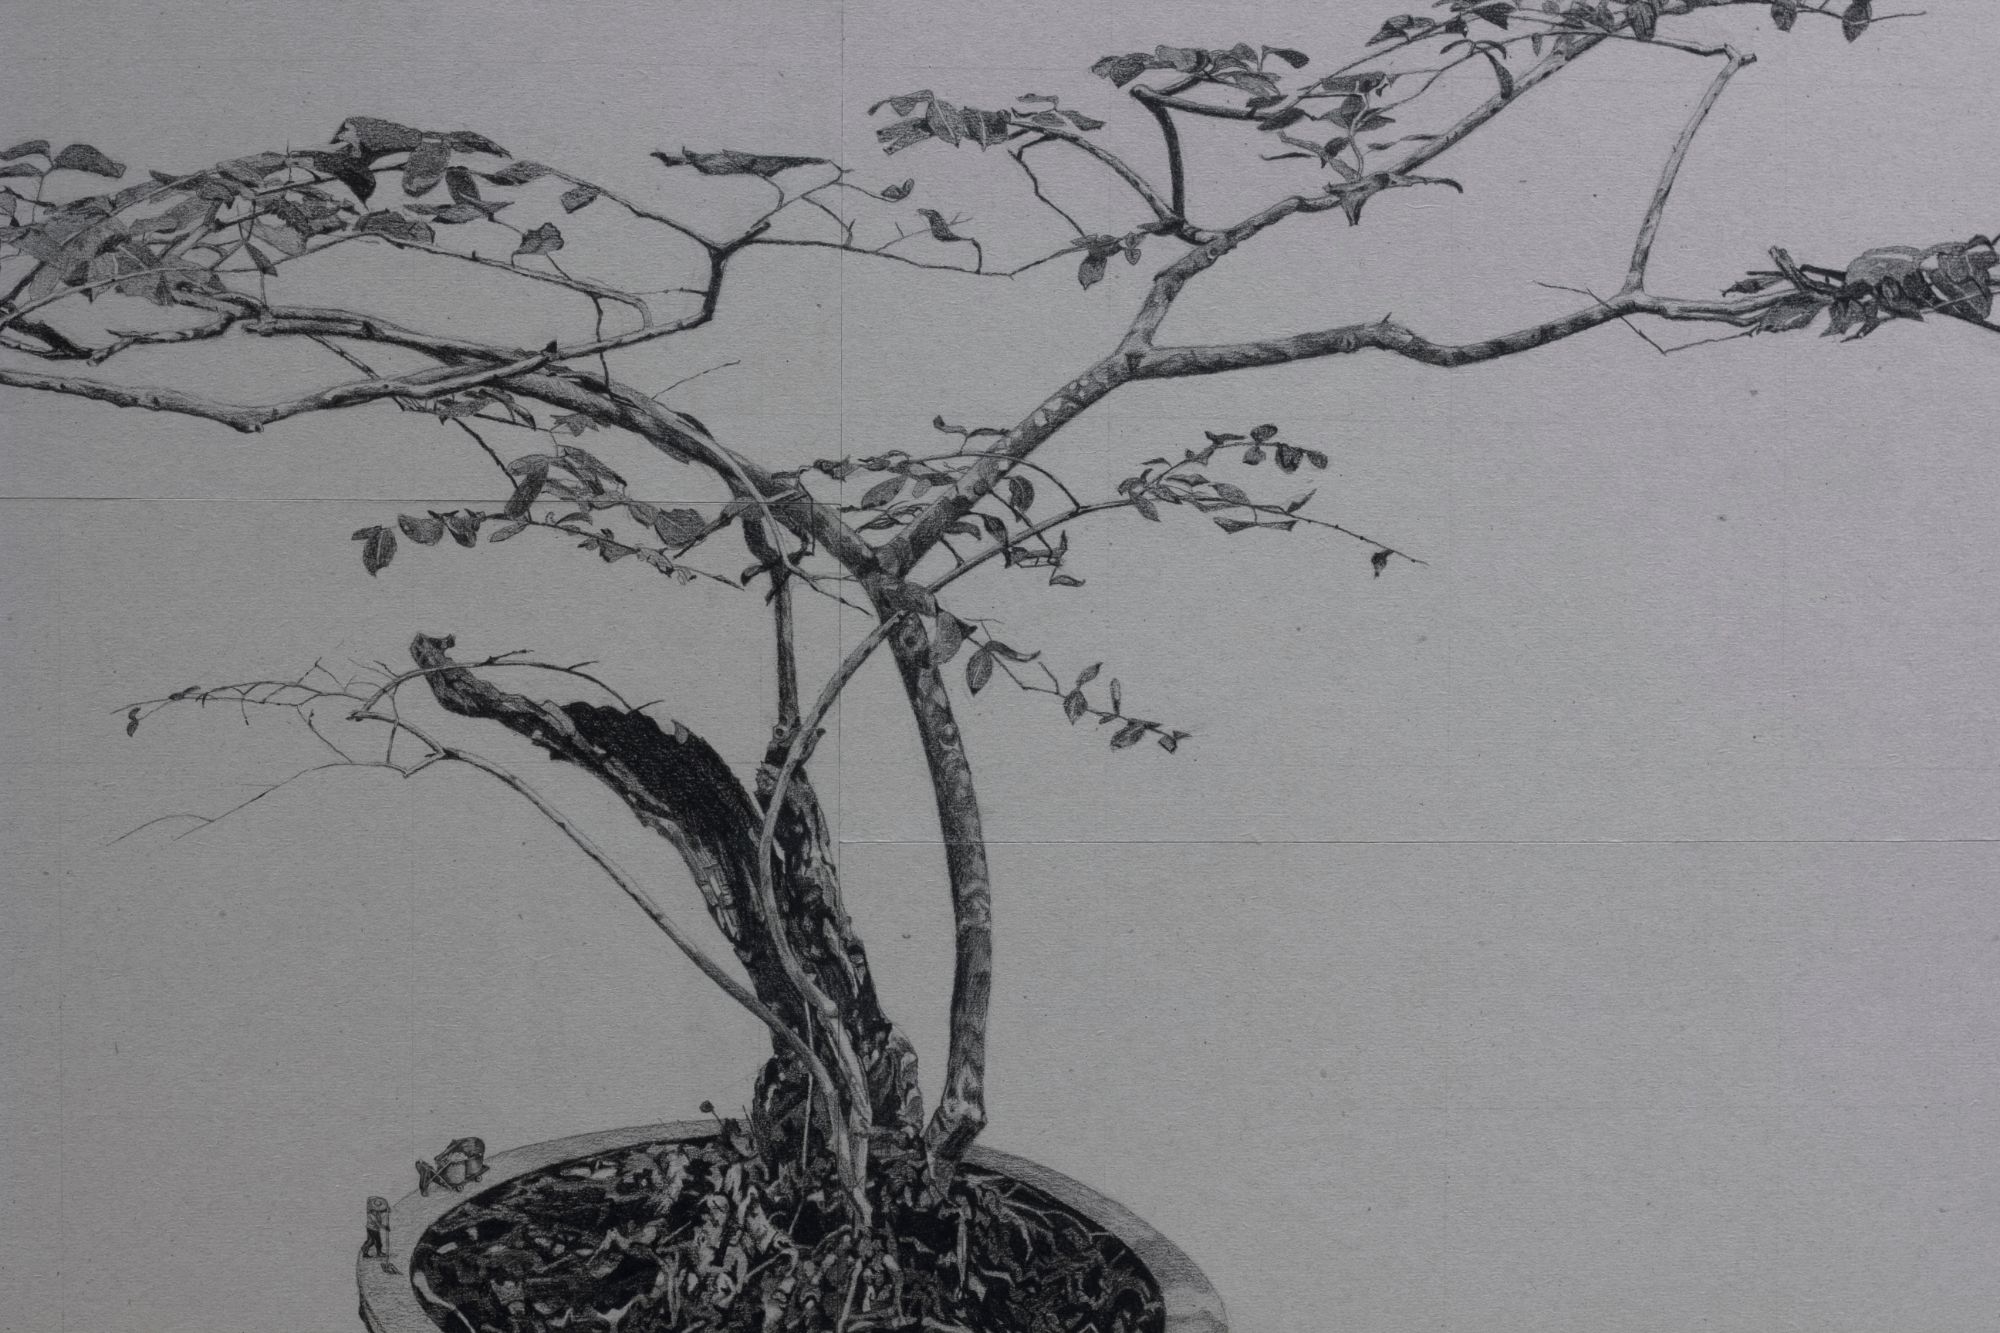 Drawing detail of bonsai tree branches